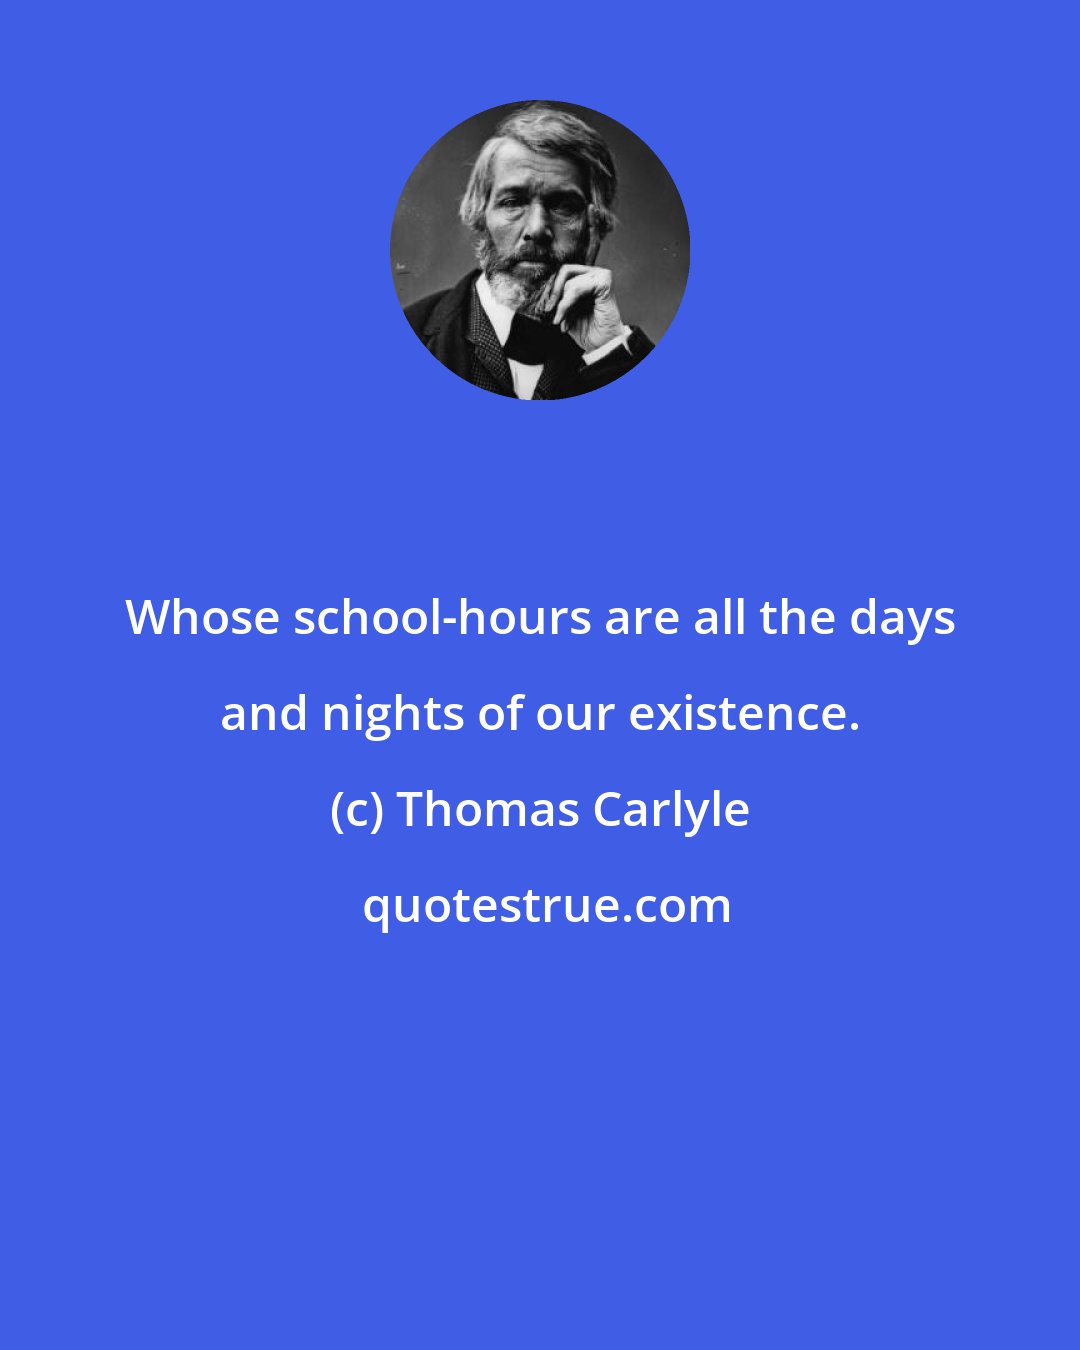 Thomas Carlyle: Whose school-hours are all the days and nights of our existence.